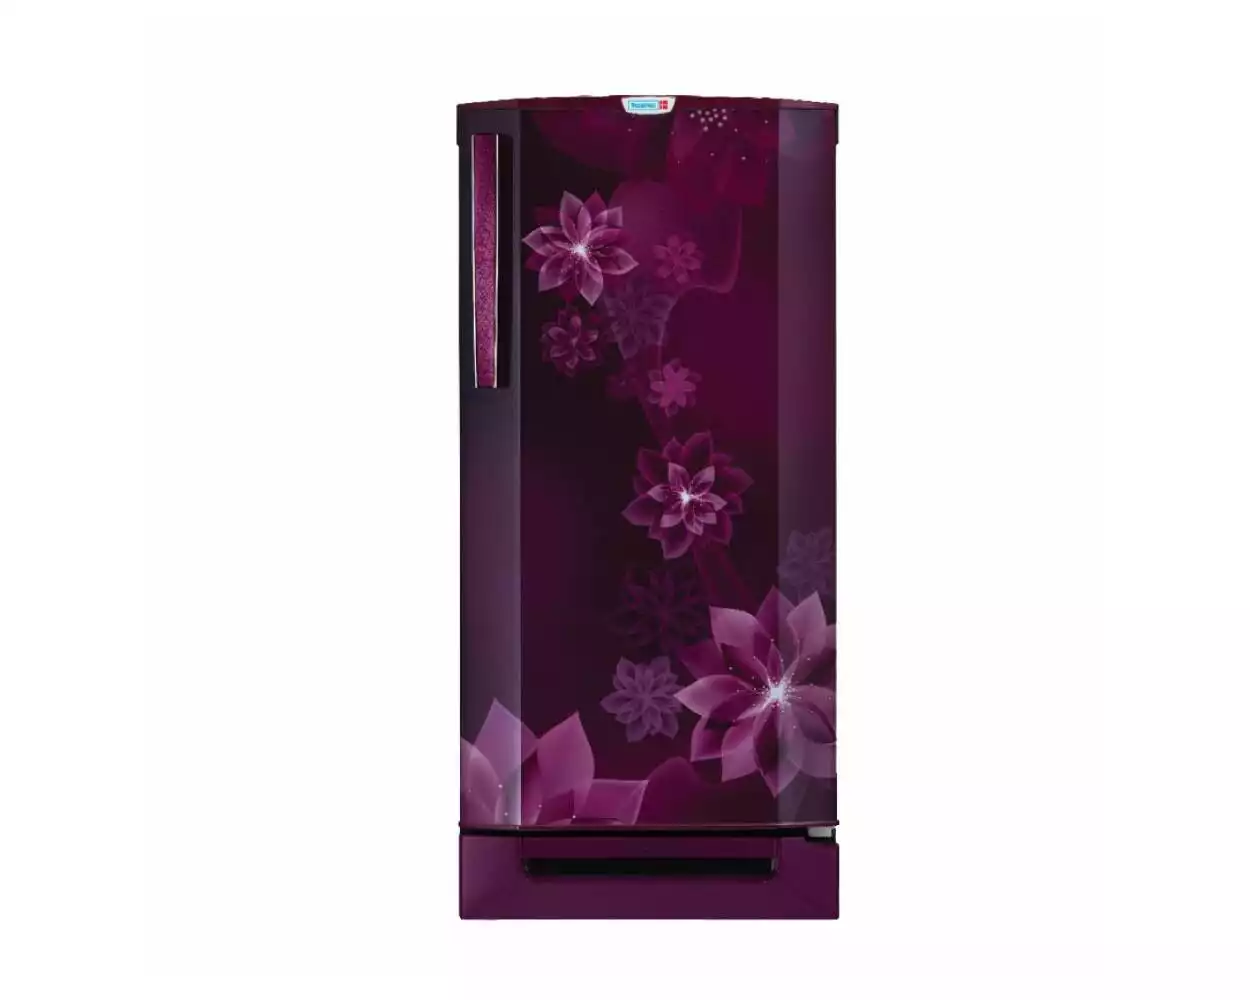 Scanfrost 275L Direct Cool Refrigerator SFR275